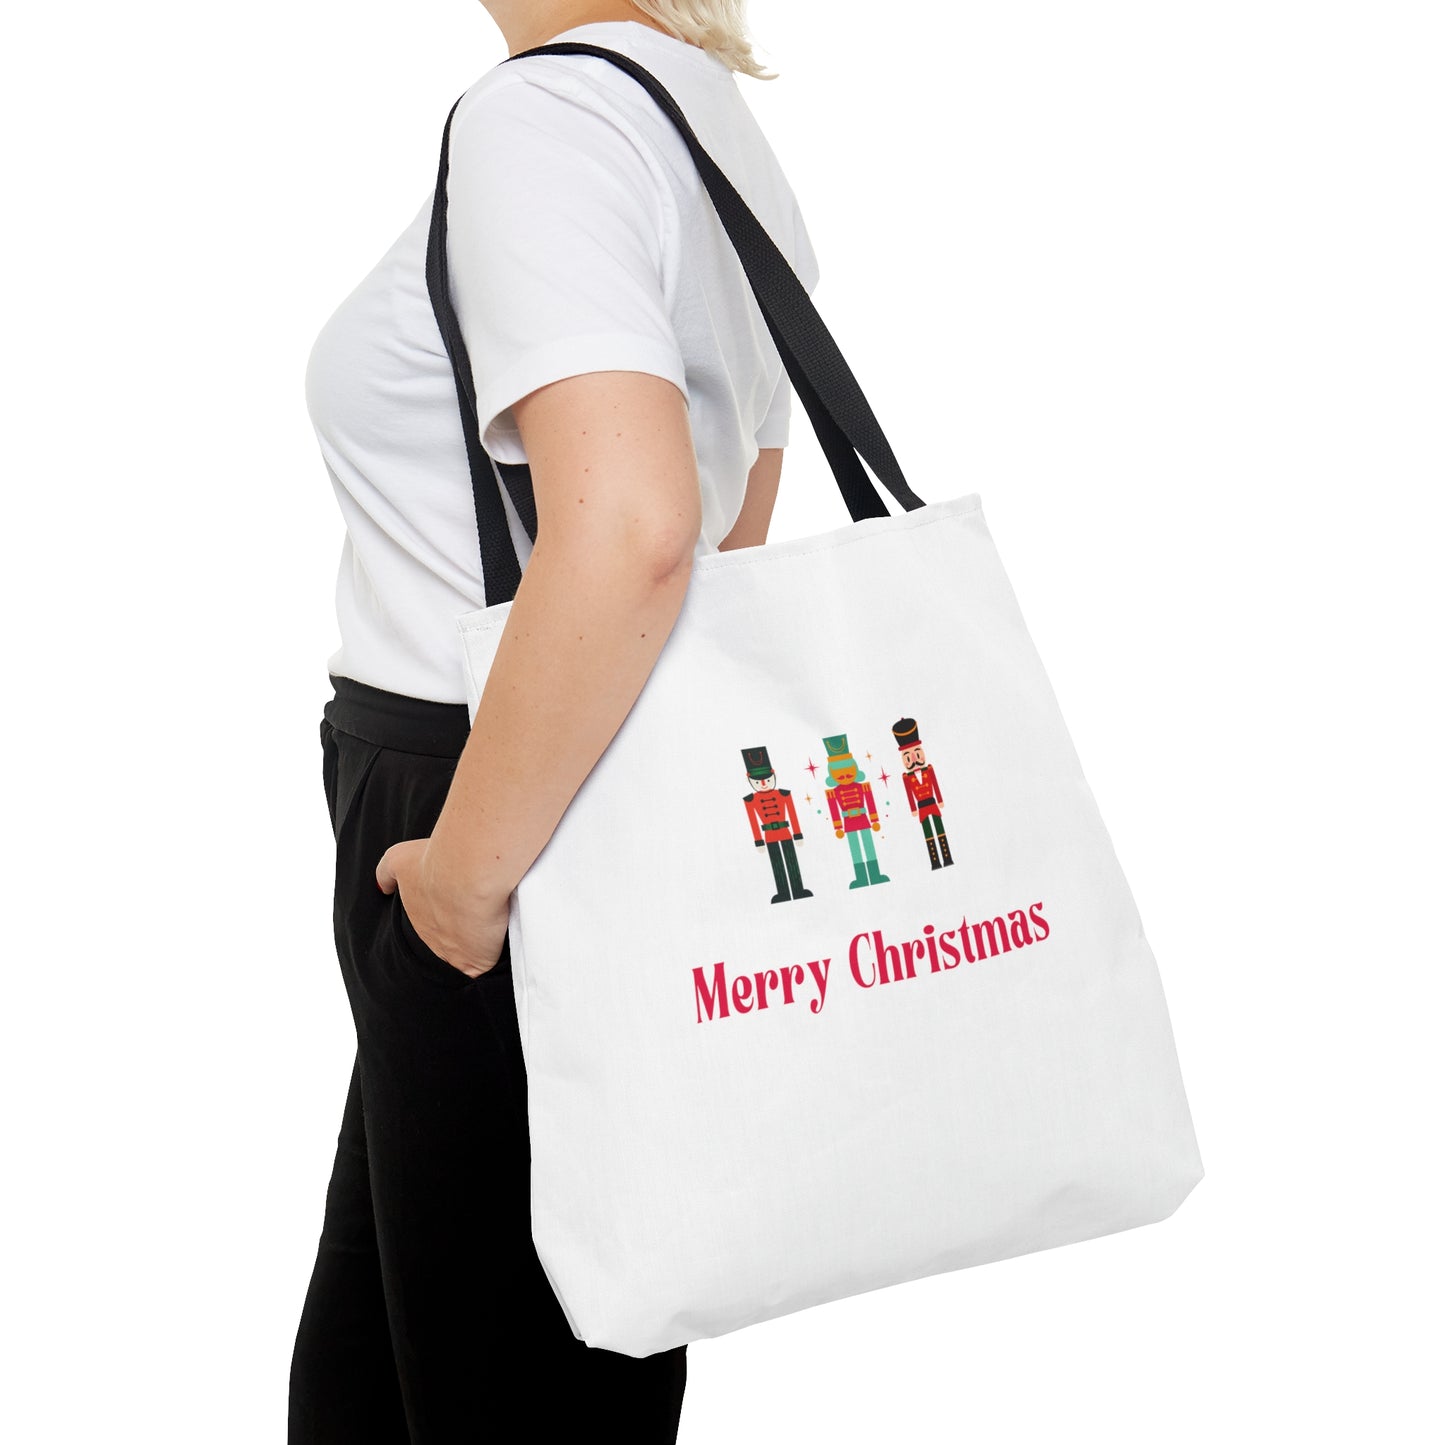 Beautiful Merry Christmas Printed Canvas Tote Bags